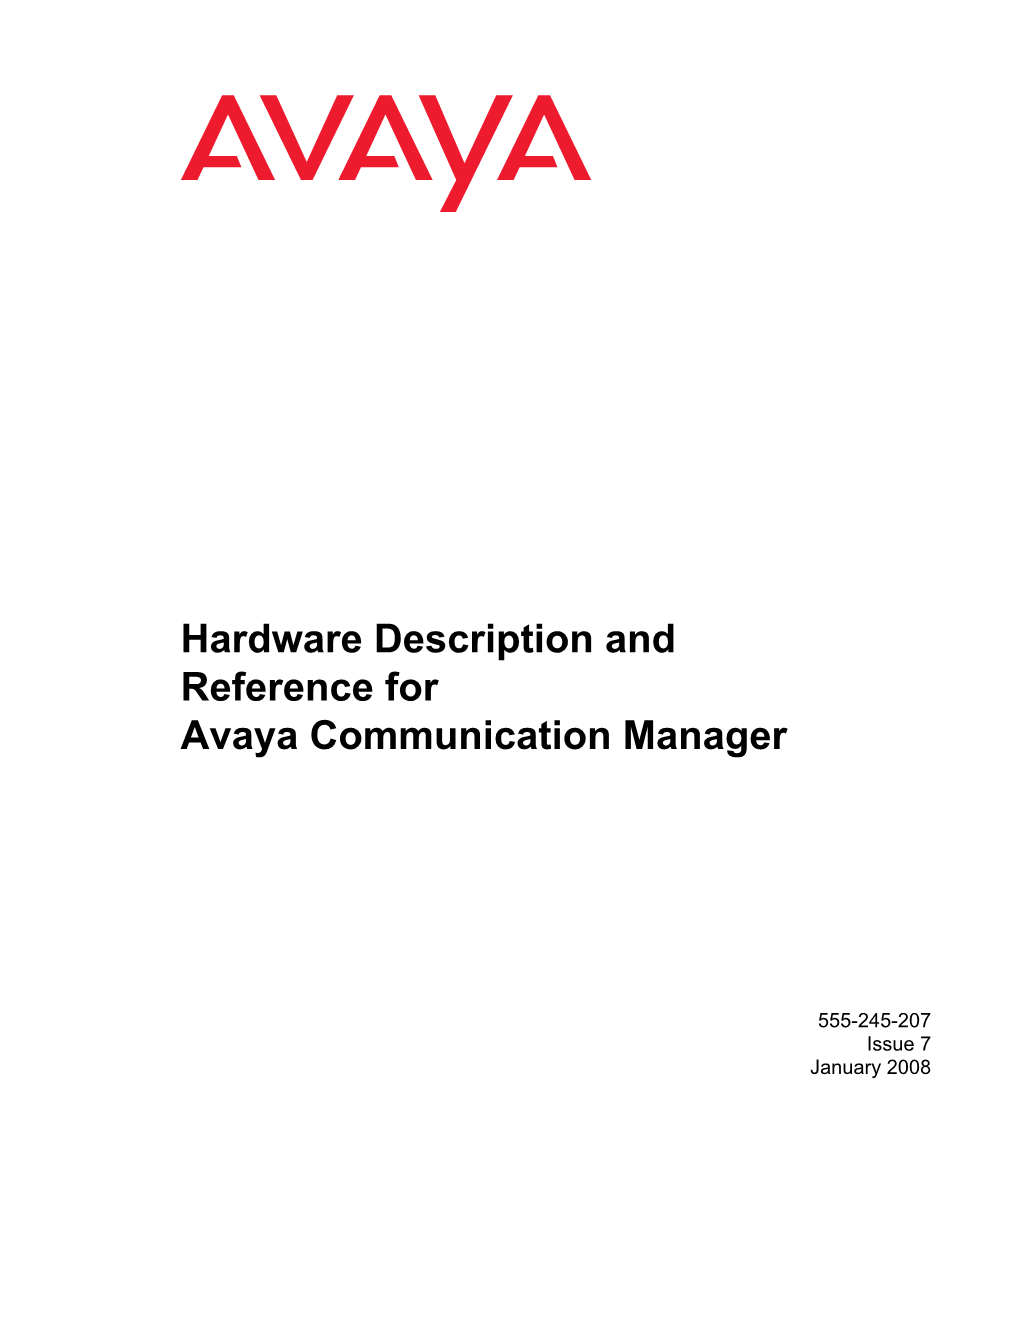 Hardware Description and Reference for Avaya Communication Manager